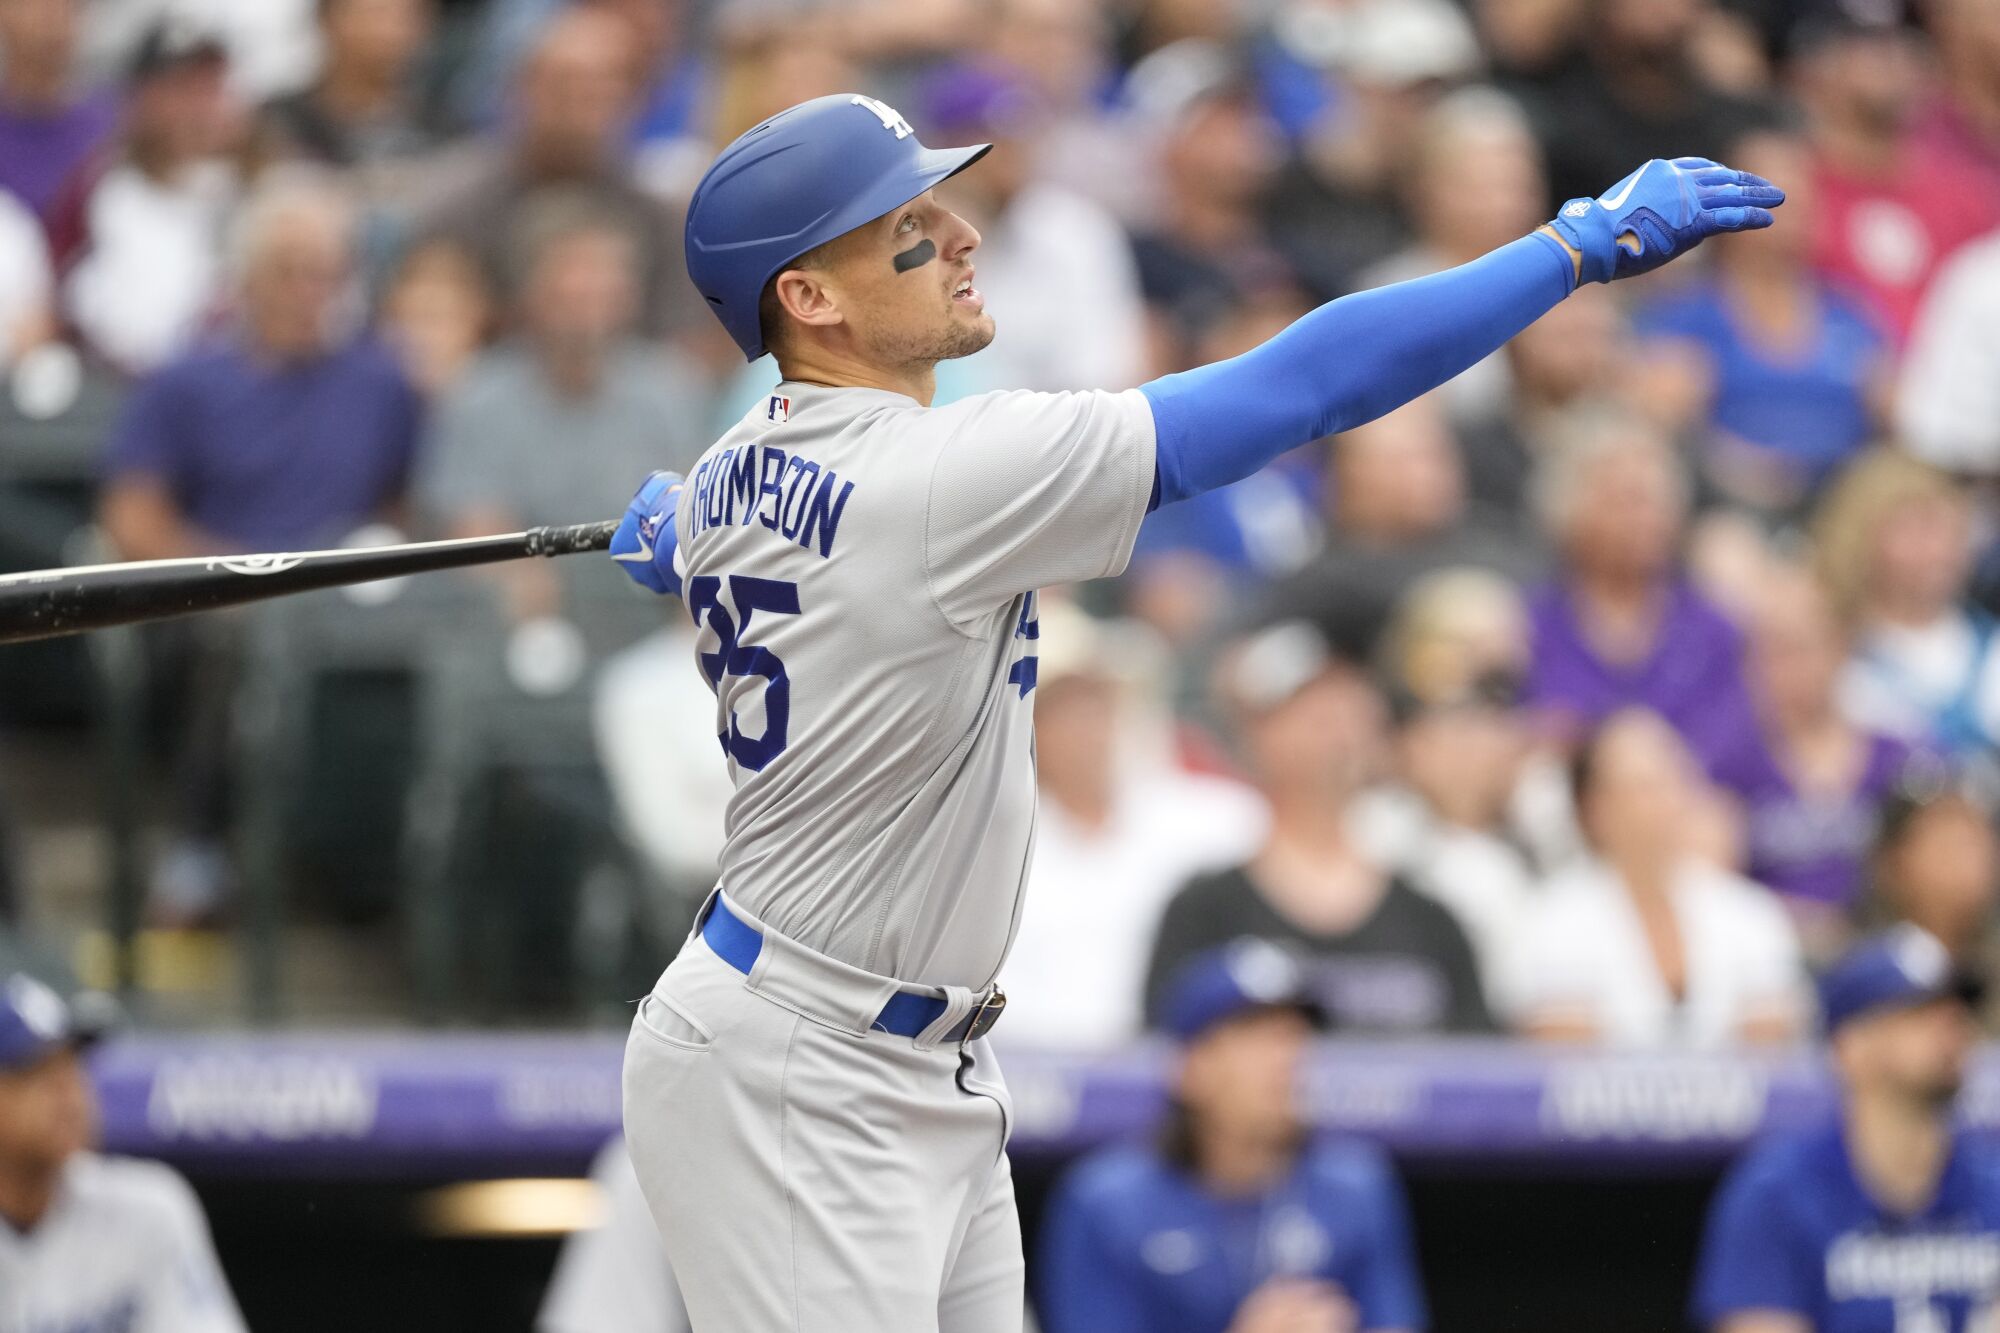 Trayce Thompson bats for the Dodgers.